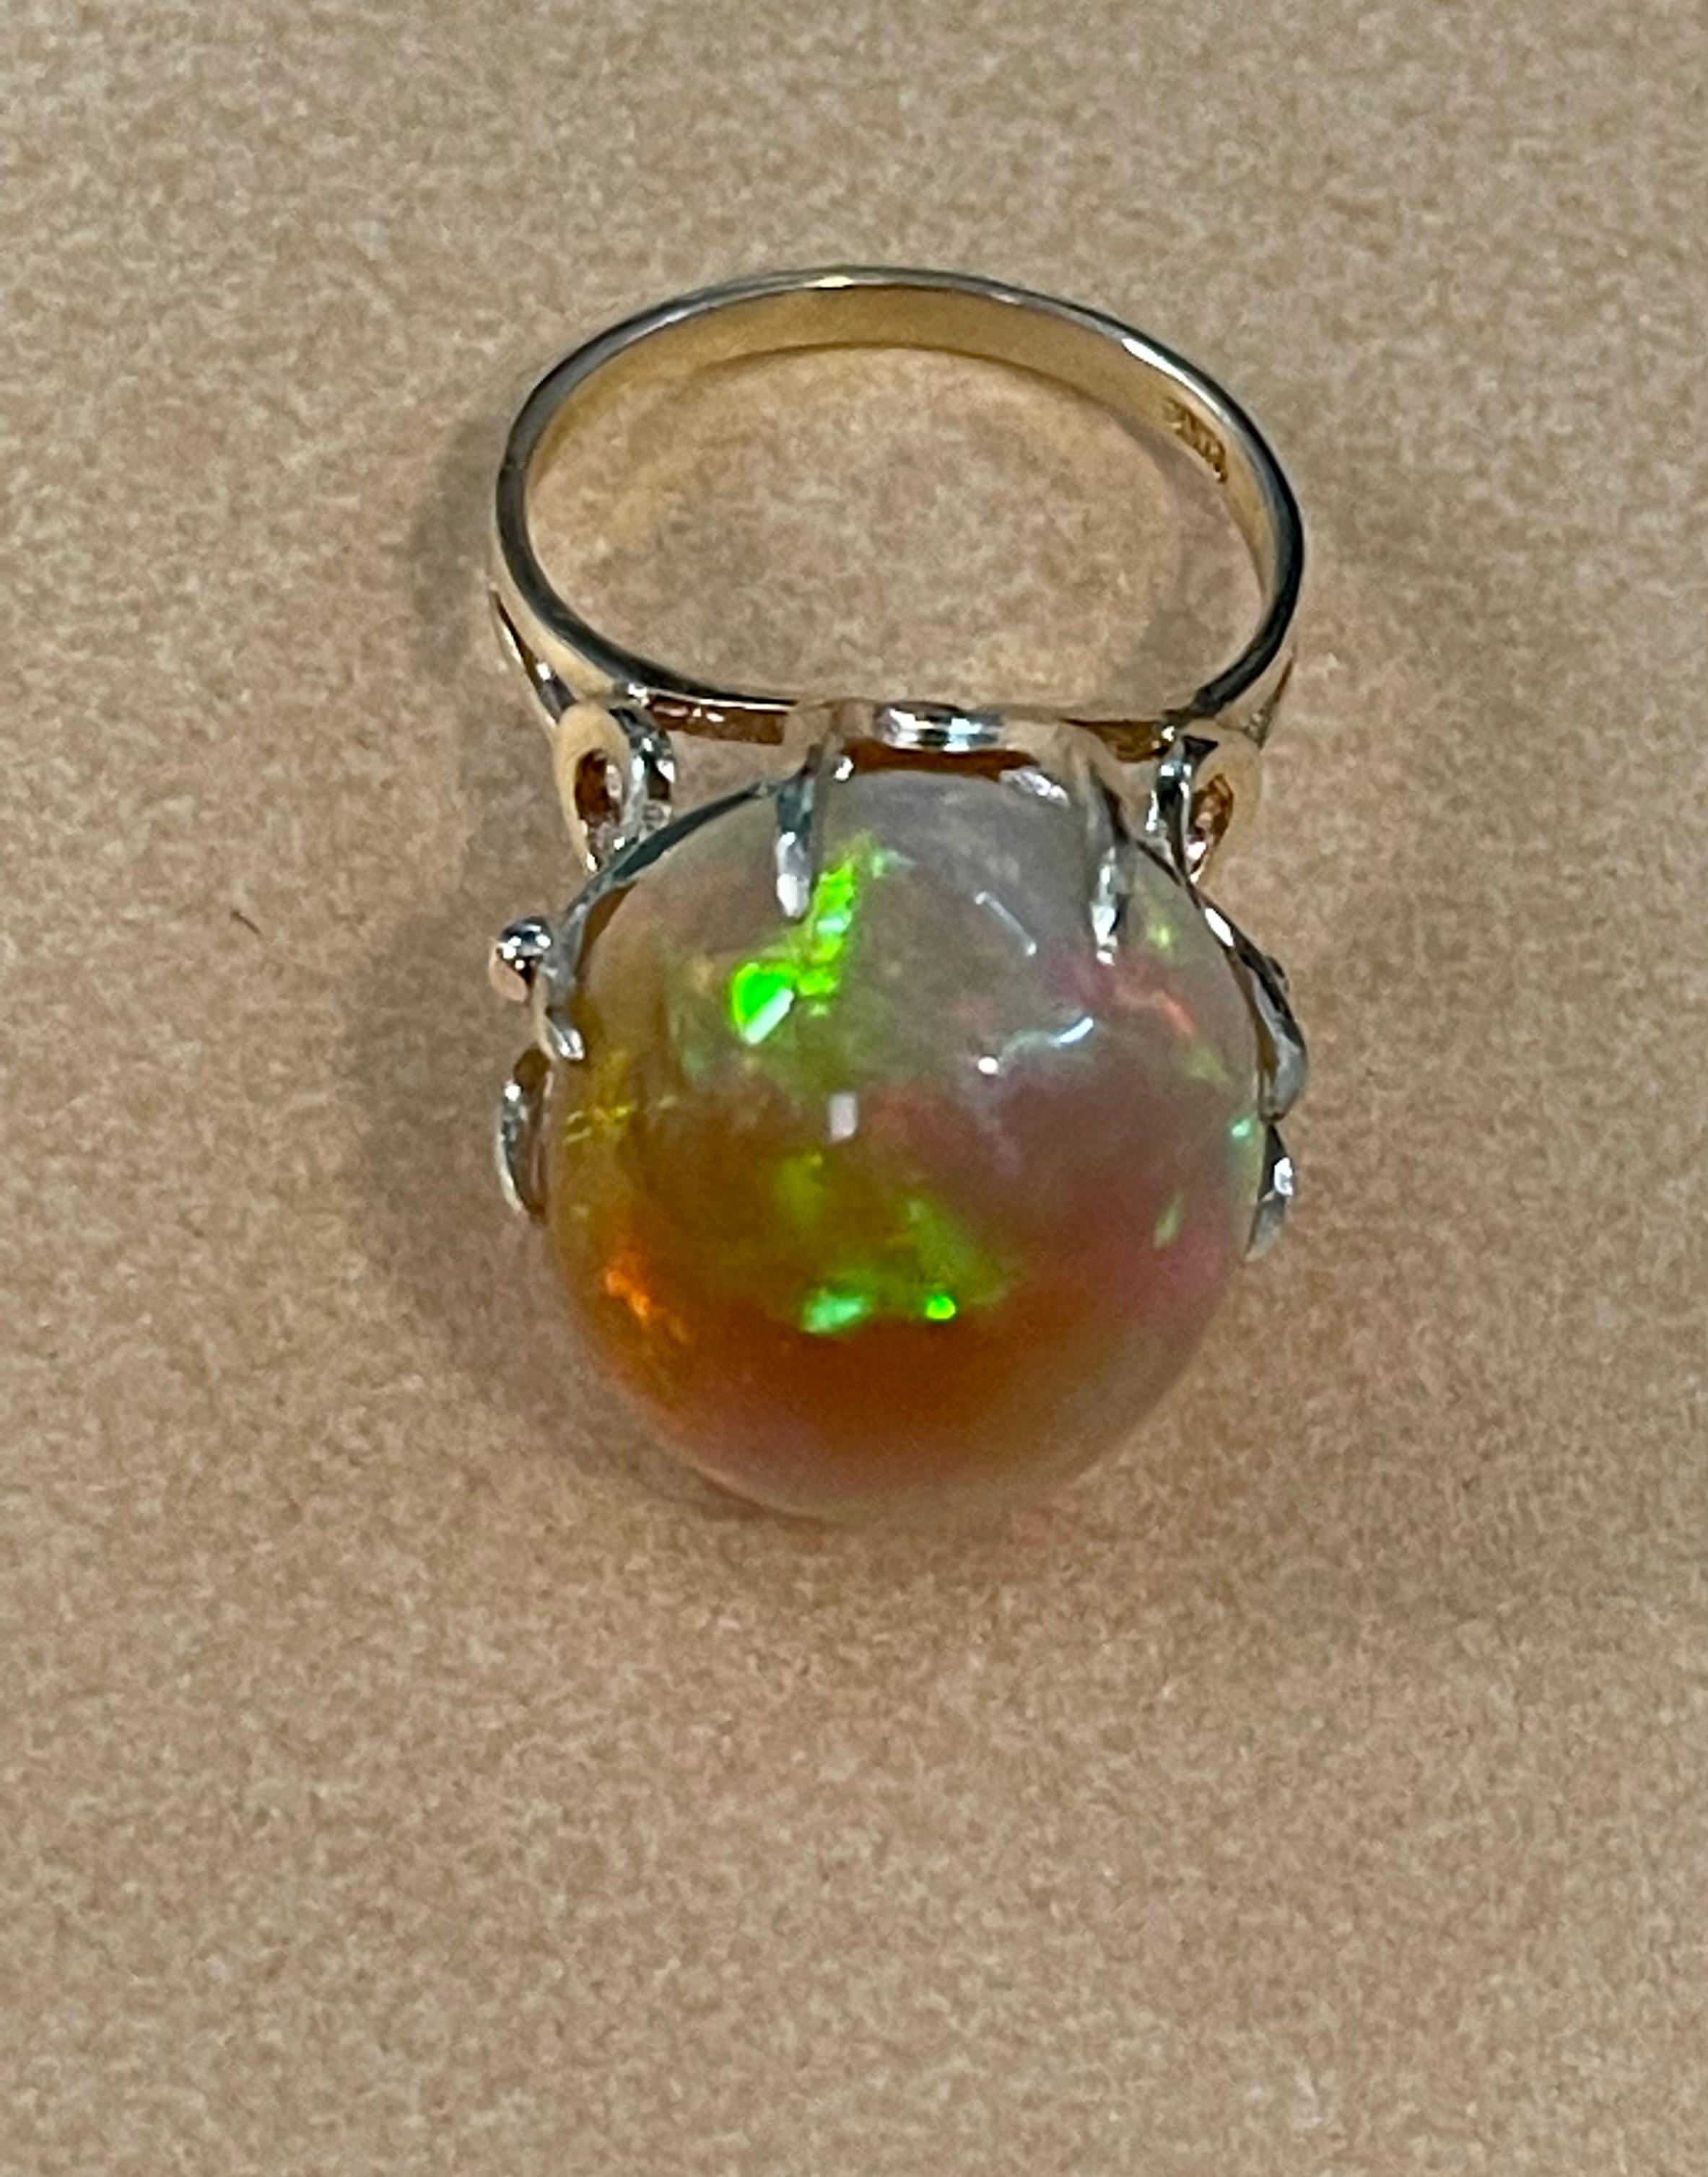 12 Carat Oval Shape Ethiopian Opal Cocktail Ring 14 Karat Yellow Gold For Sale 6